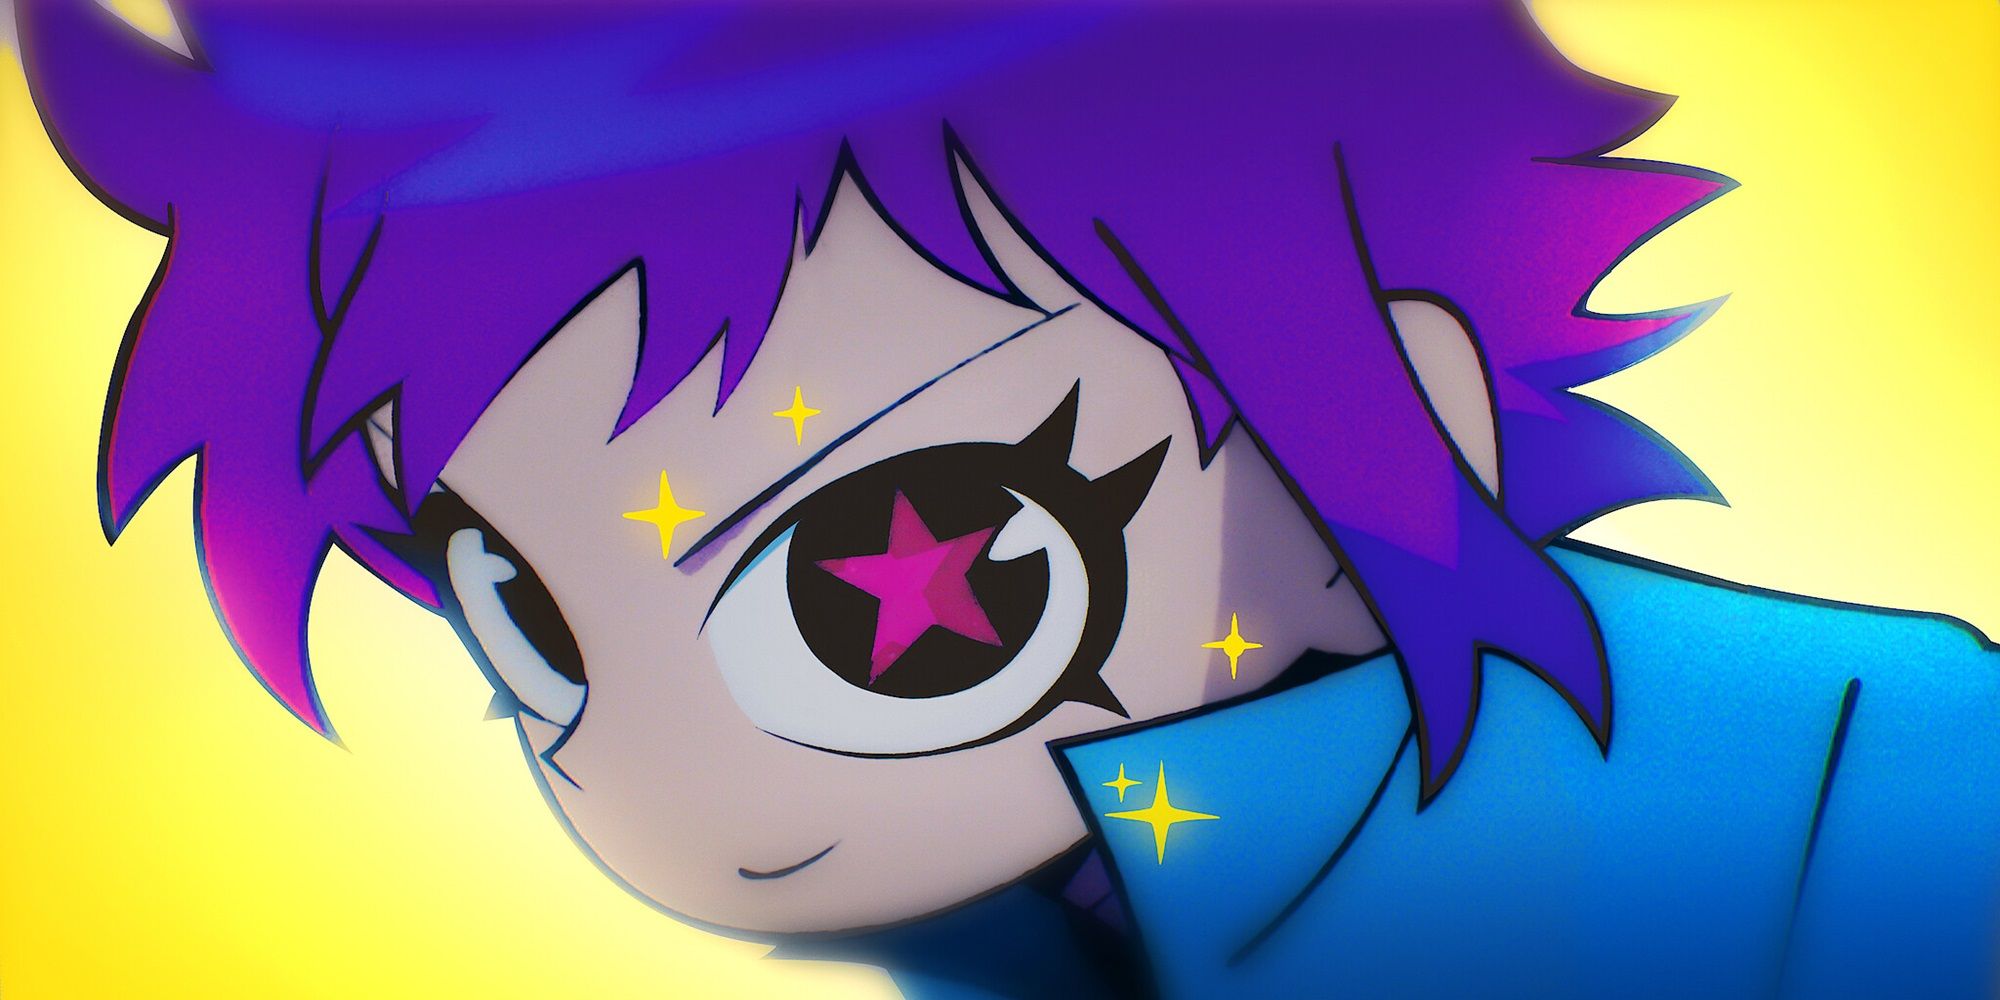 Screenshot from Scott Pilgrim Takes Off anime shows Ramona Flowers with blue and purple hair and a pink star inside of her eye.